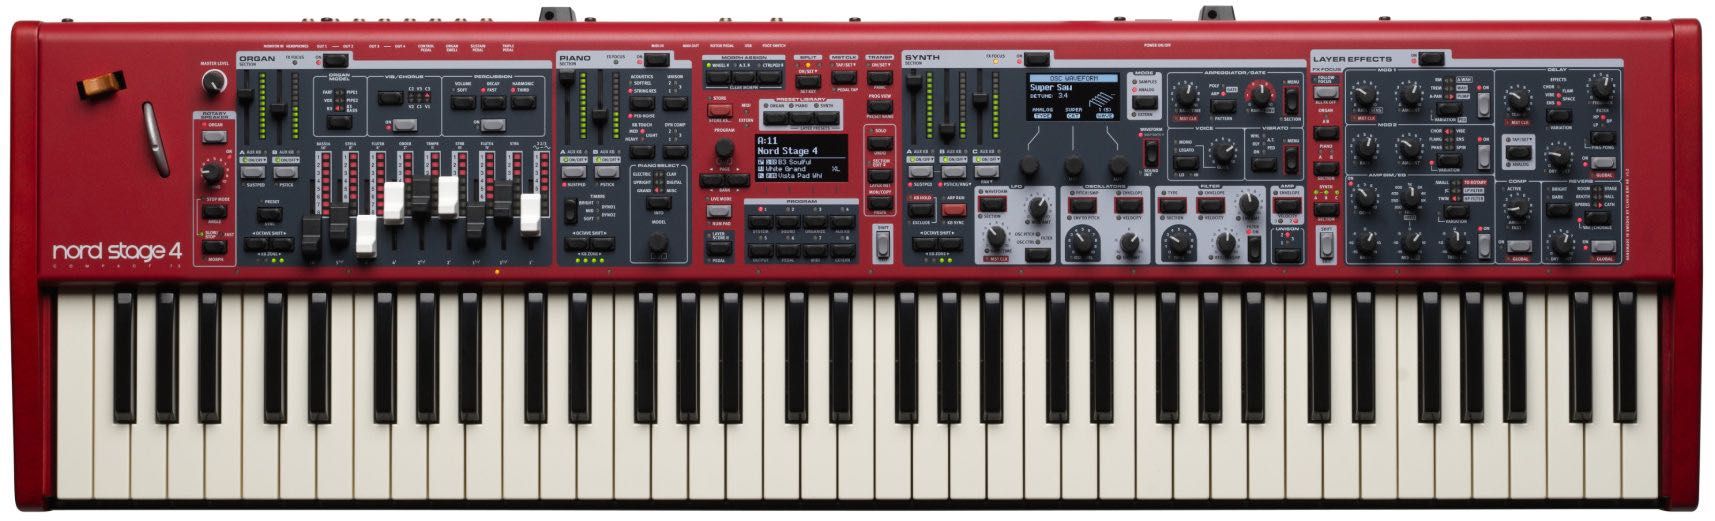 NORD Stage 4 73 Compact | kup NOWY wymień STARY